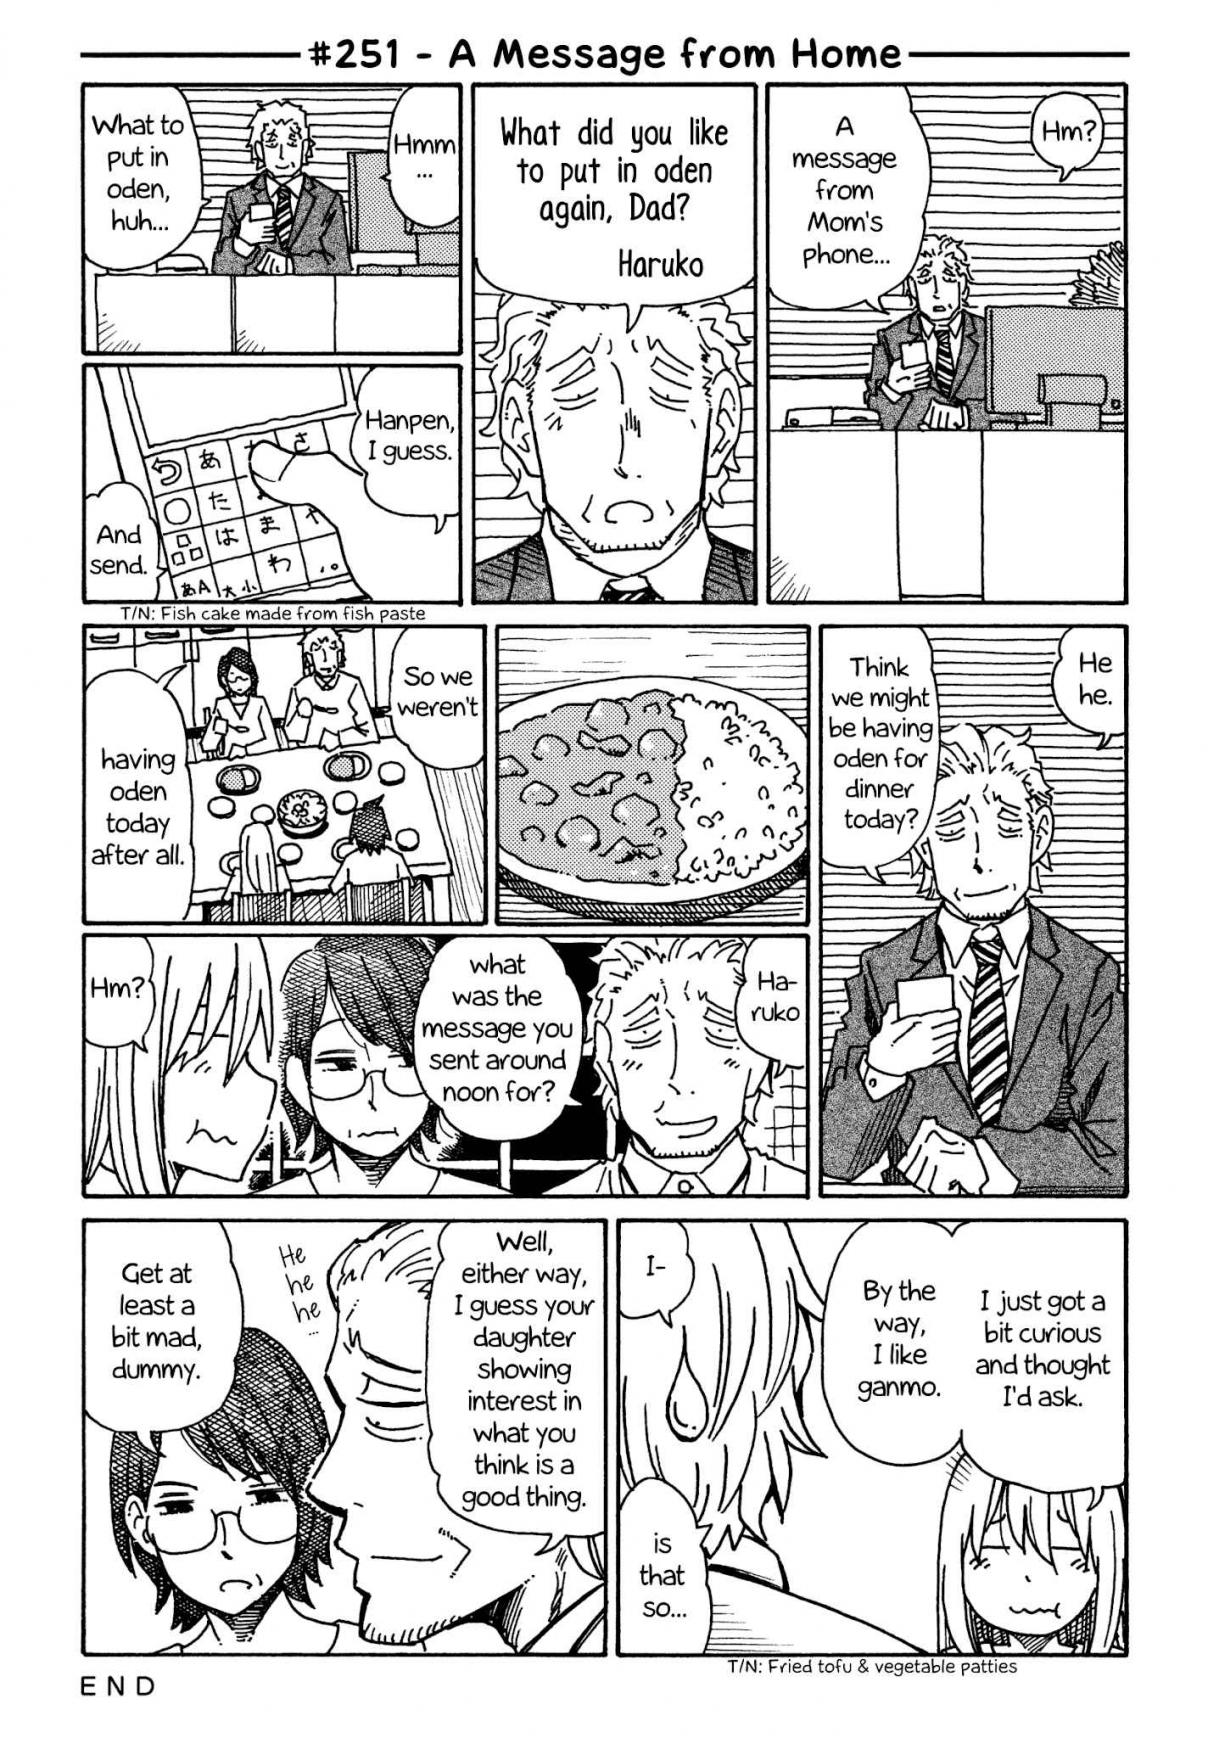 Hatarakanai Futari (The Jobless Siblings) Chapter 251: A Message From Home